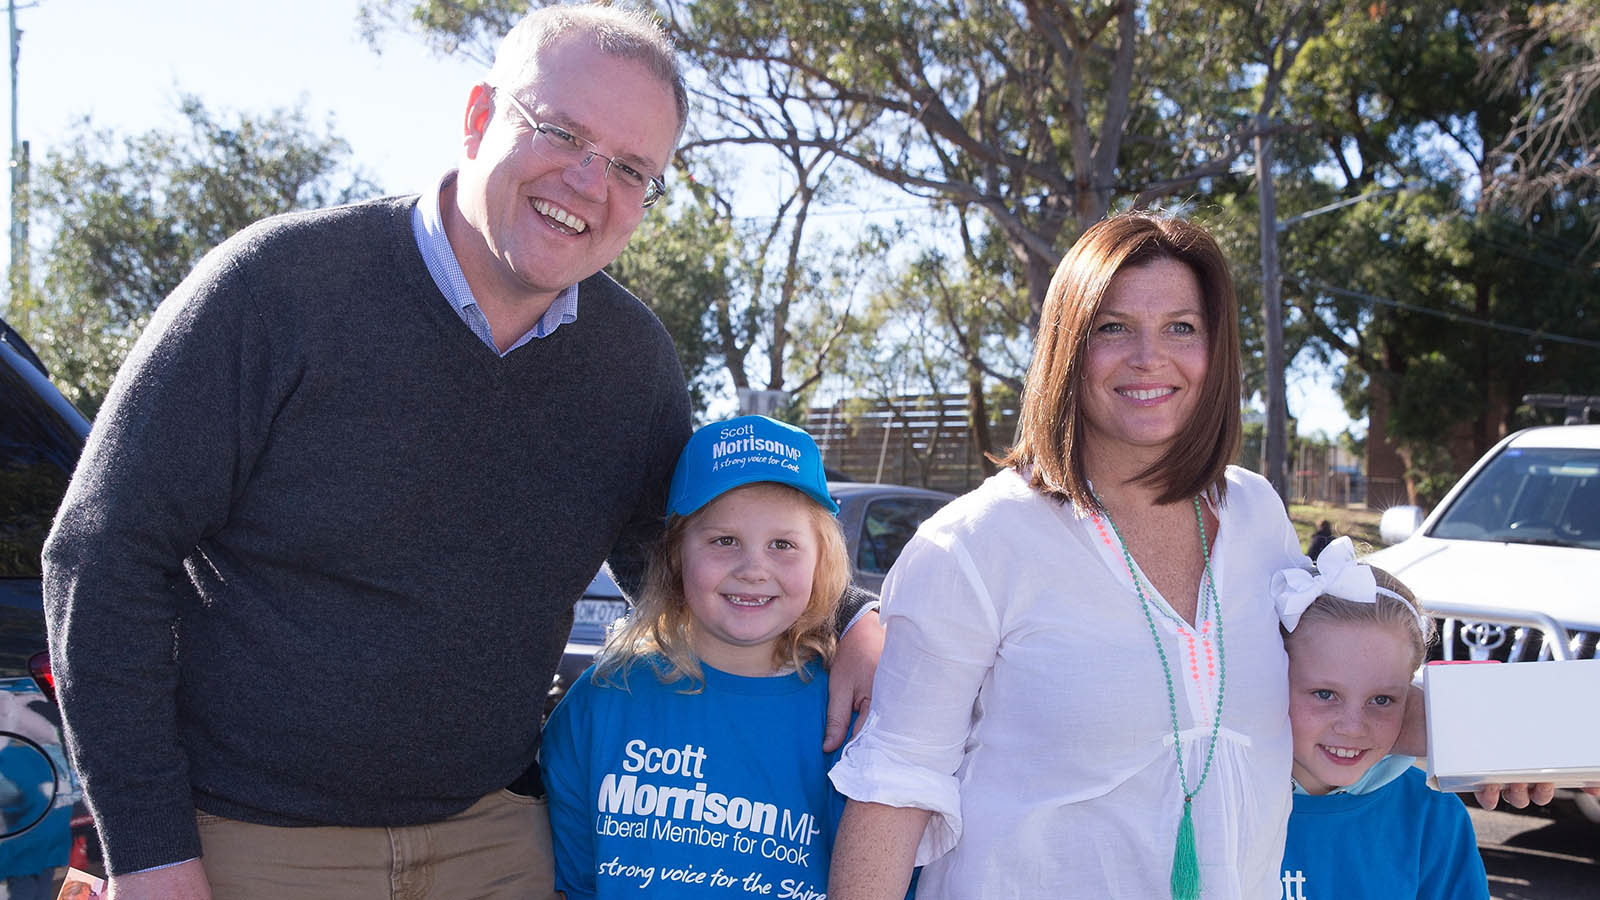 Scott Morrison with his family